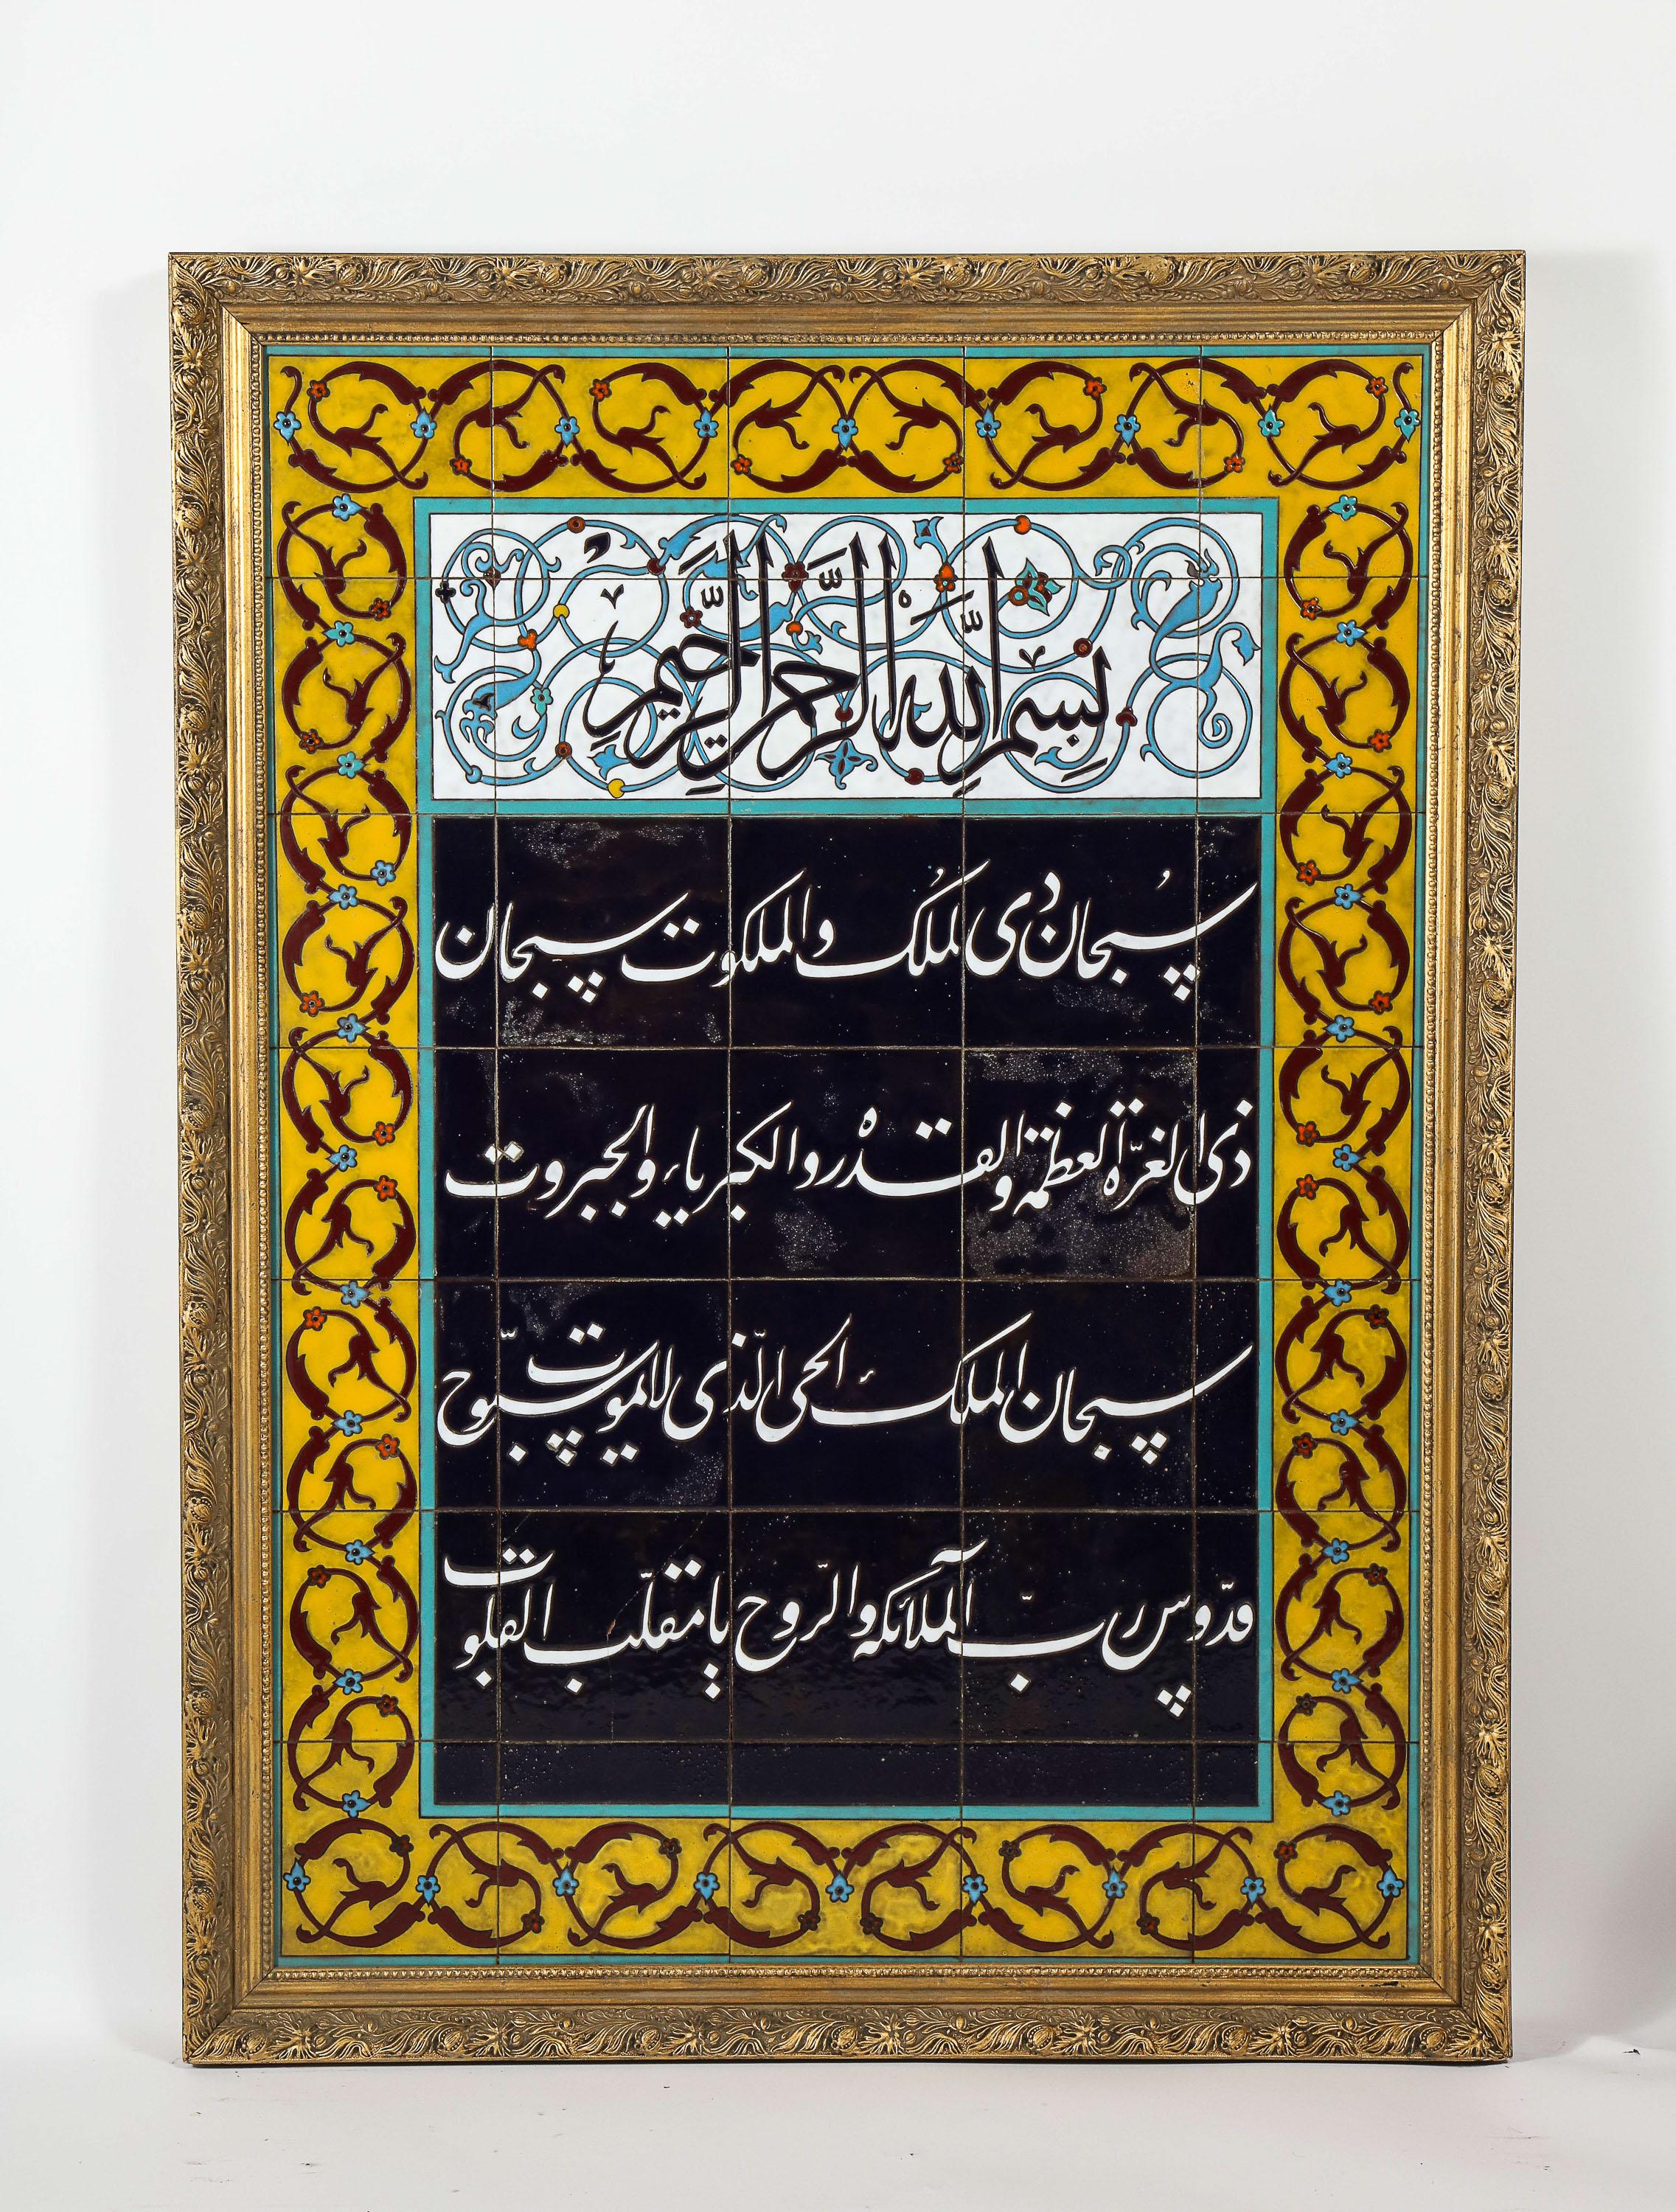 An Exceptional Pair of Islamic Middle Eastern Ceramic Tiles with Quran Verses  8